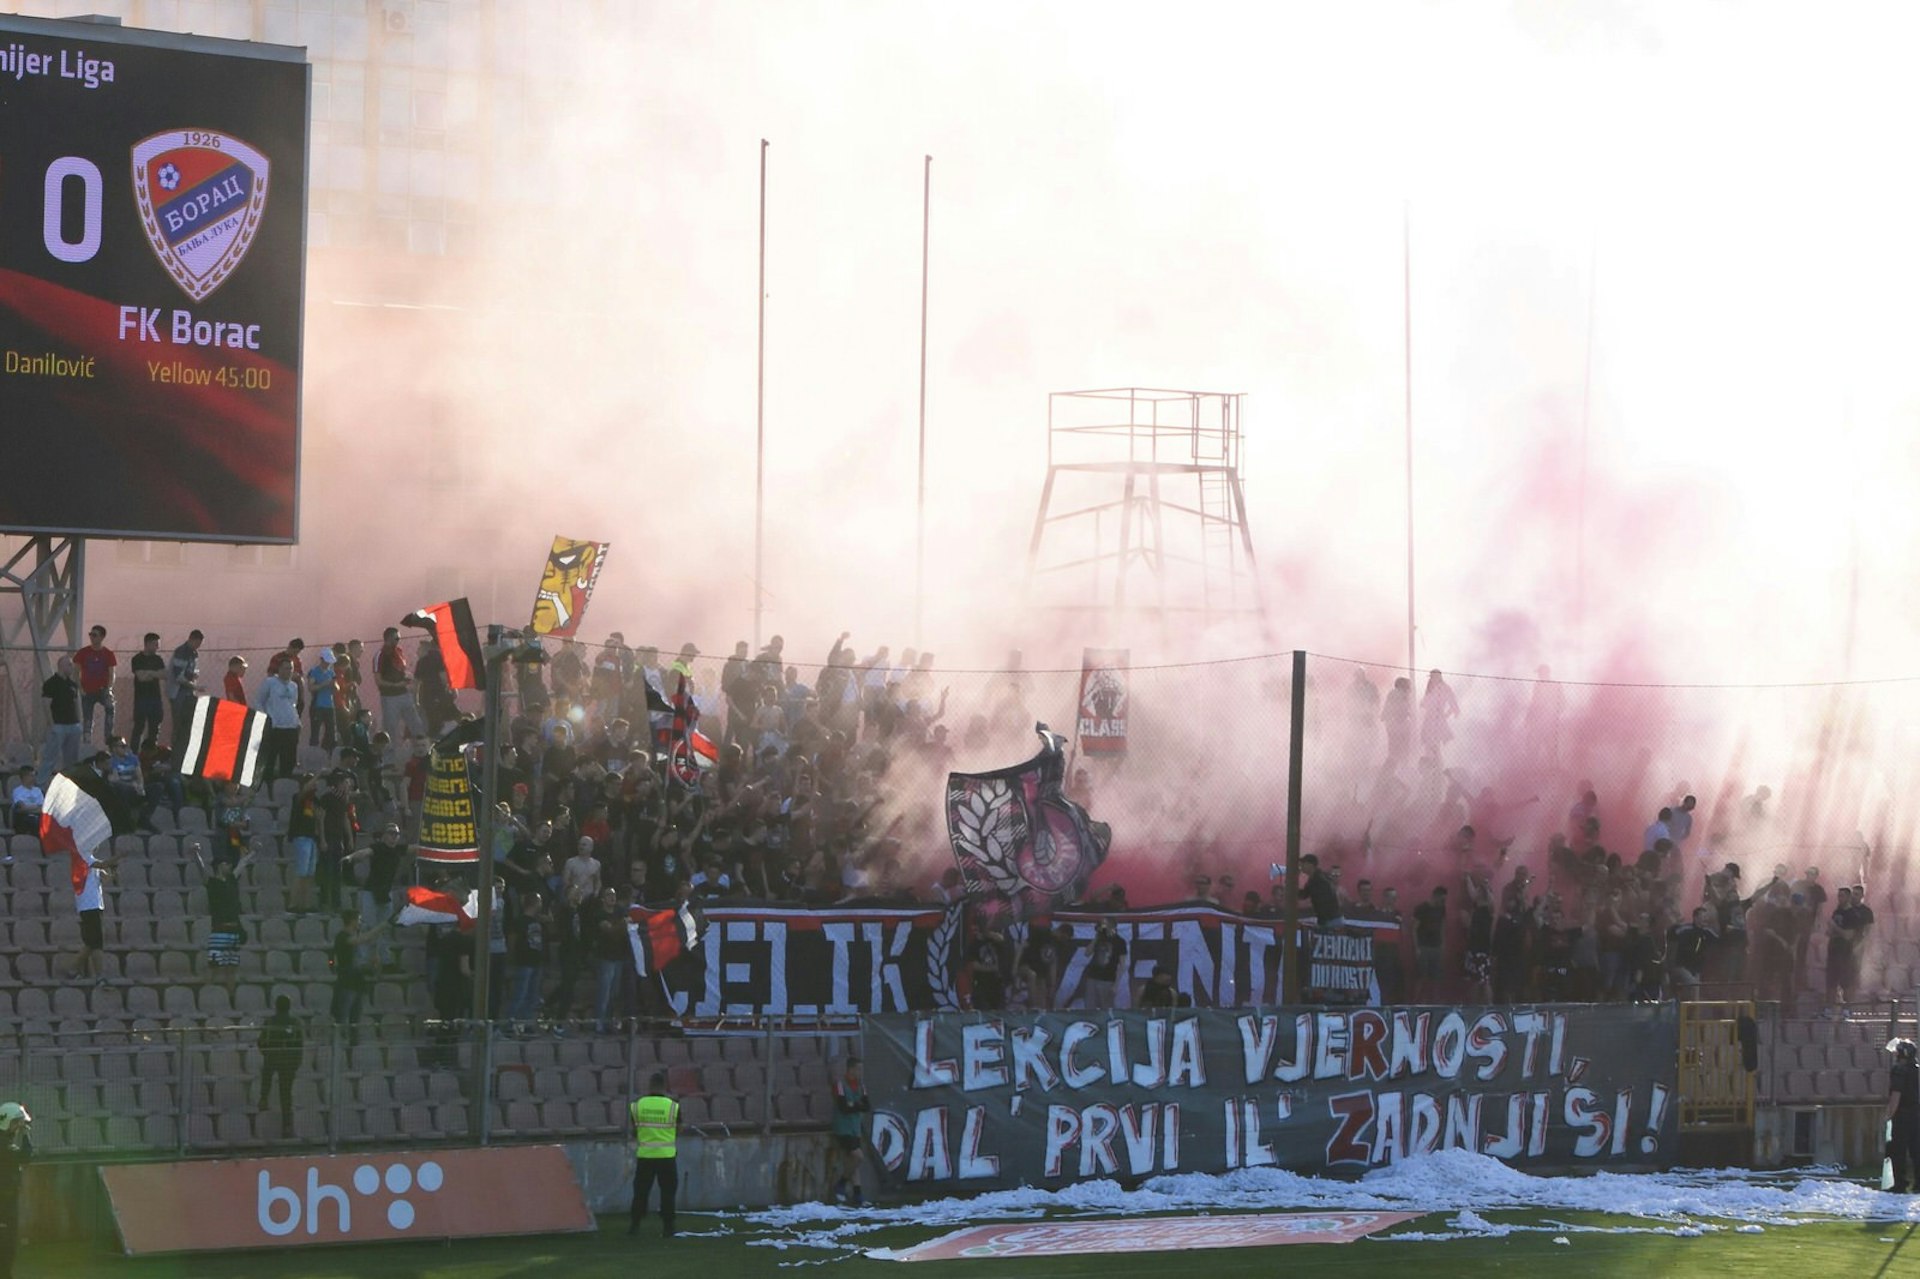 Groups of football fans in a stand during a Čelik home game. Flares have been let off, with the smoke obscuring many of the people in the crowd.